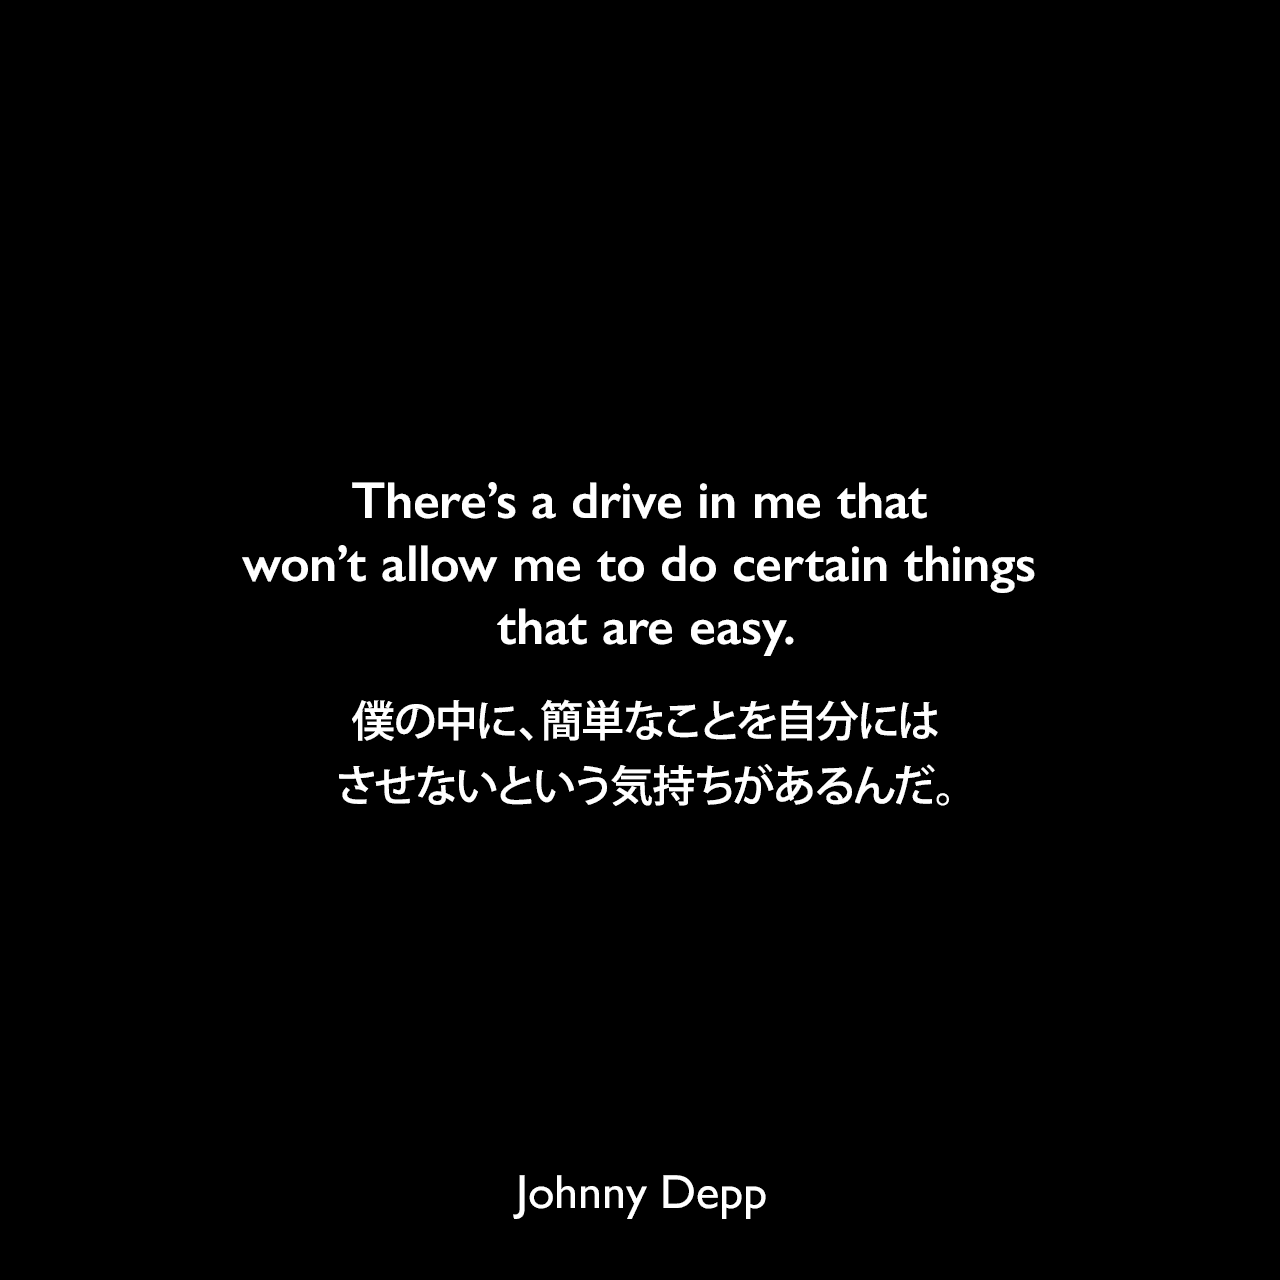 There’s a drive in me that won’t allow me to do certain things that are easy.僕の中に、簡単なことを自分にはさせないという気持ちがあるんだ。Johnny Depp